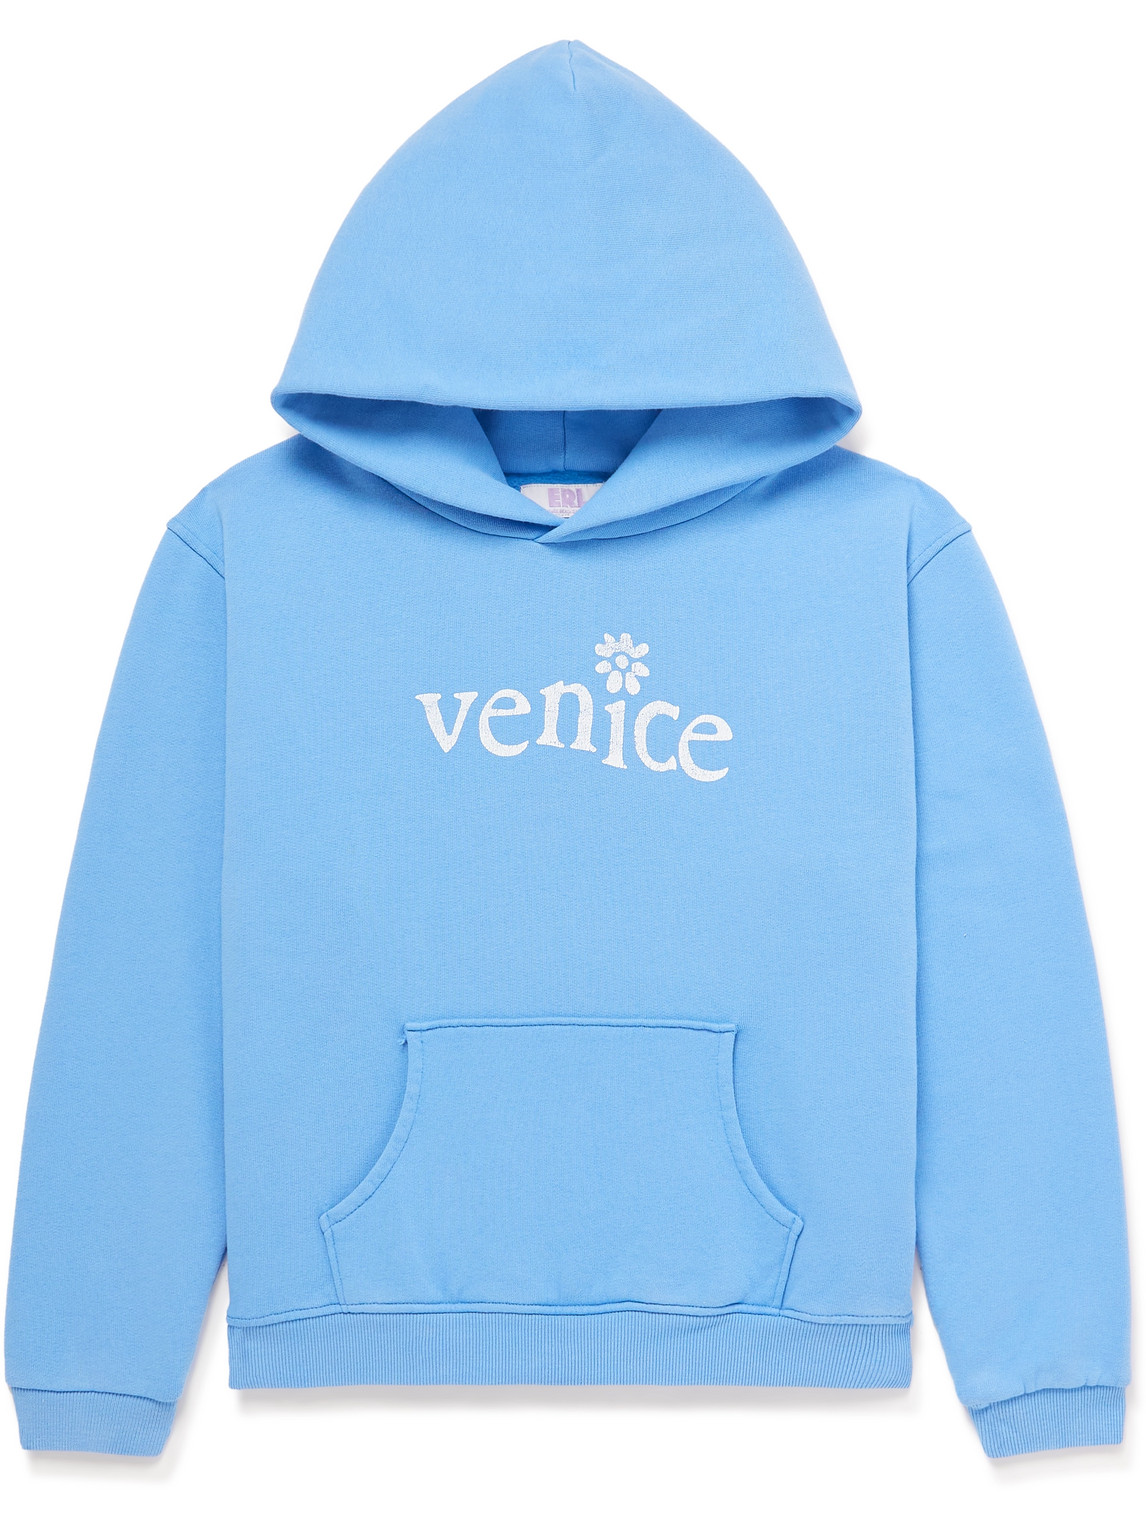 ERL Kids Venice Printed Cotton-Blend Jersey Hoodie